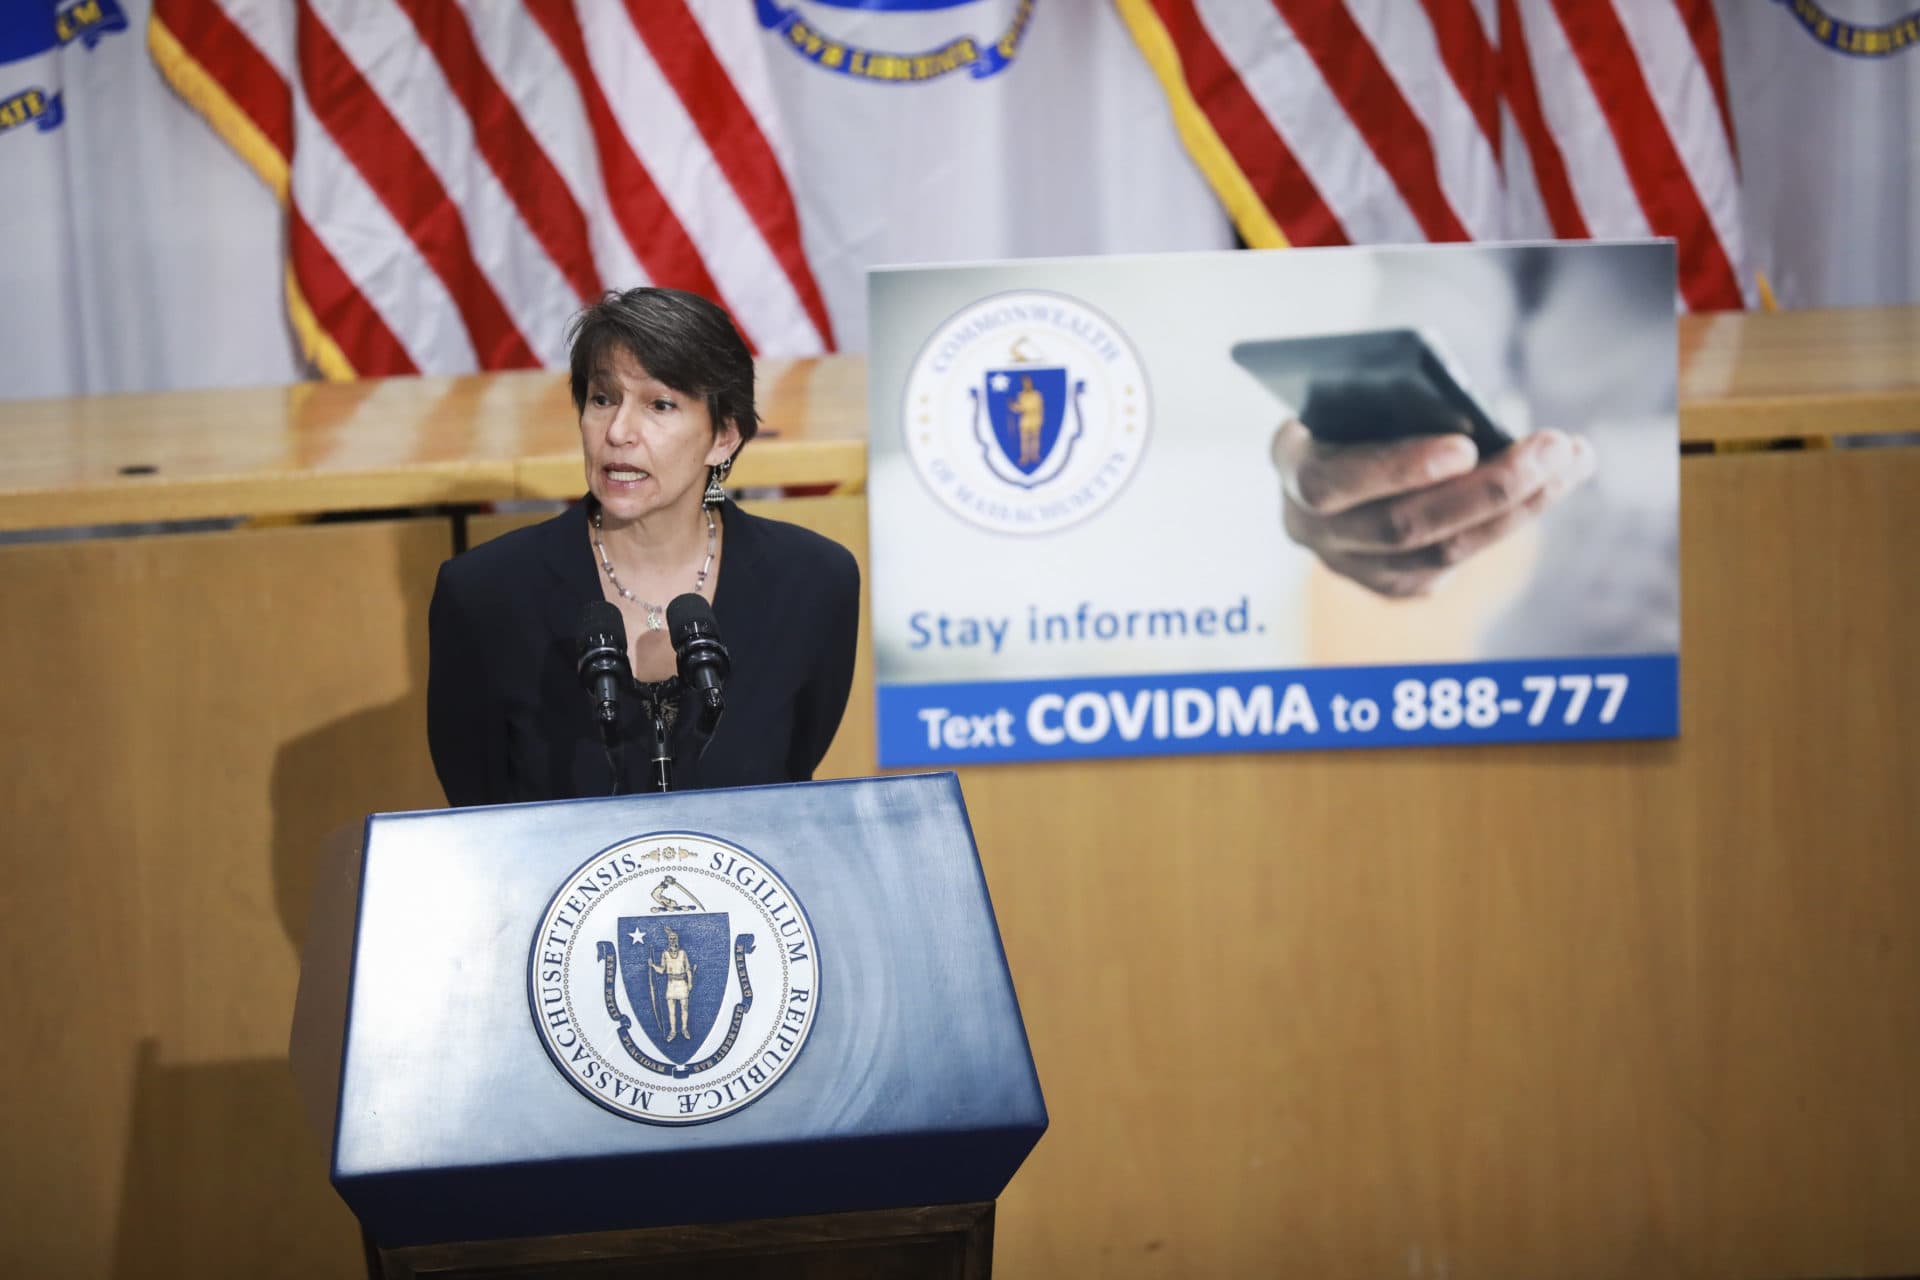 Chief Medical Officer for Partners In Health, Joia Mukherjee provides information on the Coronavirus cases in the state during a press conference at the Massachusetts State House in Boston.(Nicolaus Czarnecki/MediaNews Group/Boston Herald)